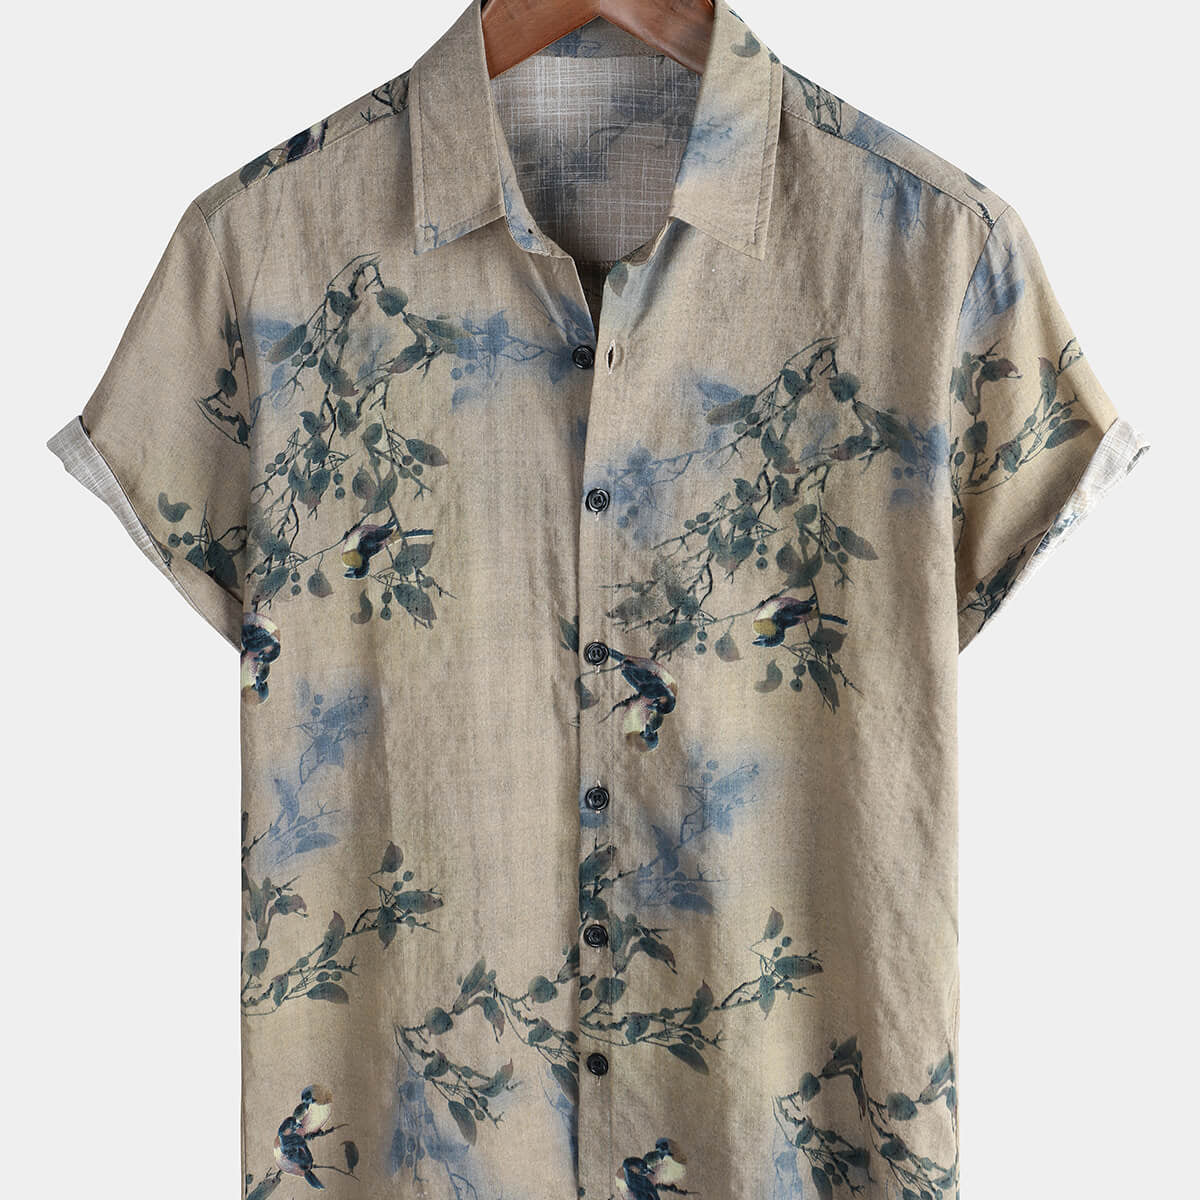 Men's Vintage Grey Floral Holiday Casual Summer Short Sleeve Button Up Shirt